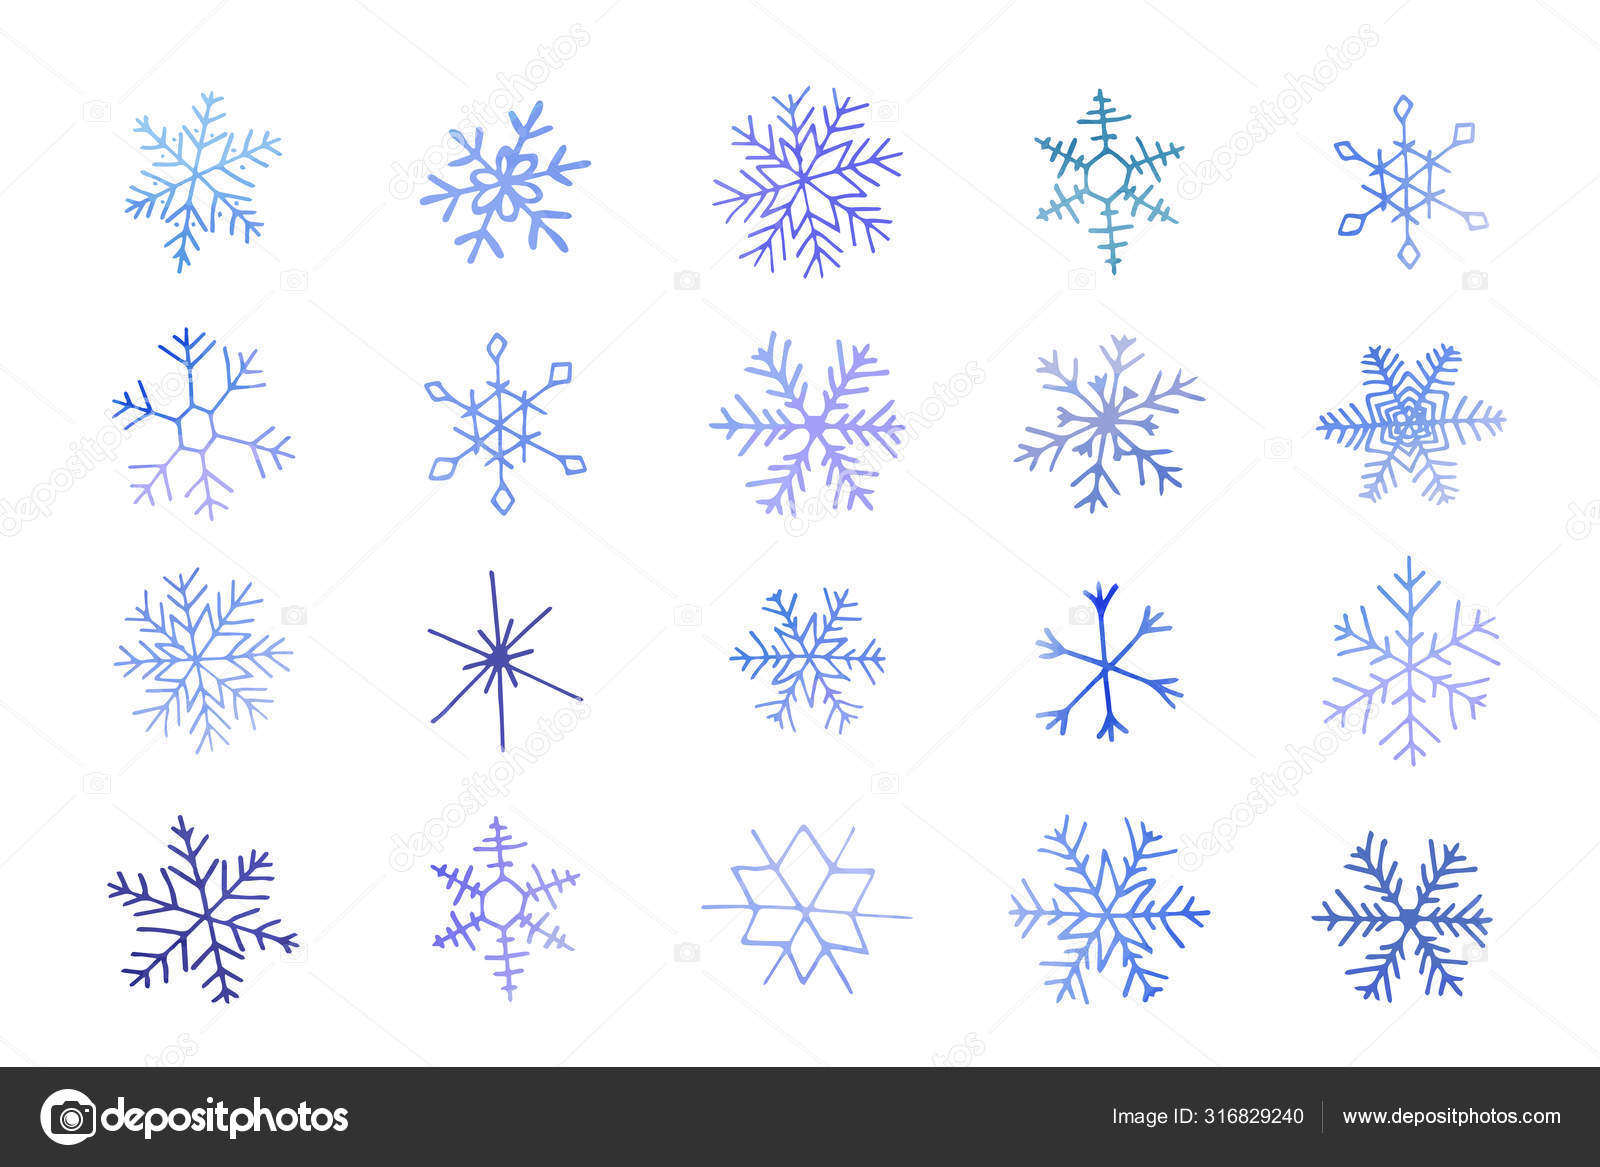 Winter hand drawn set of blue snowflakes Vector Image